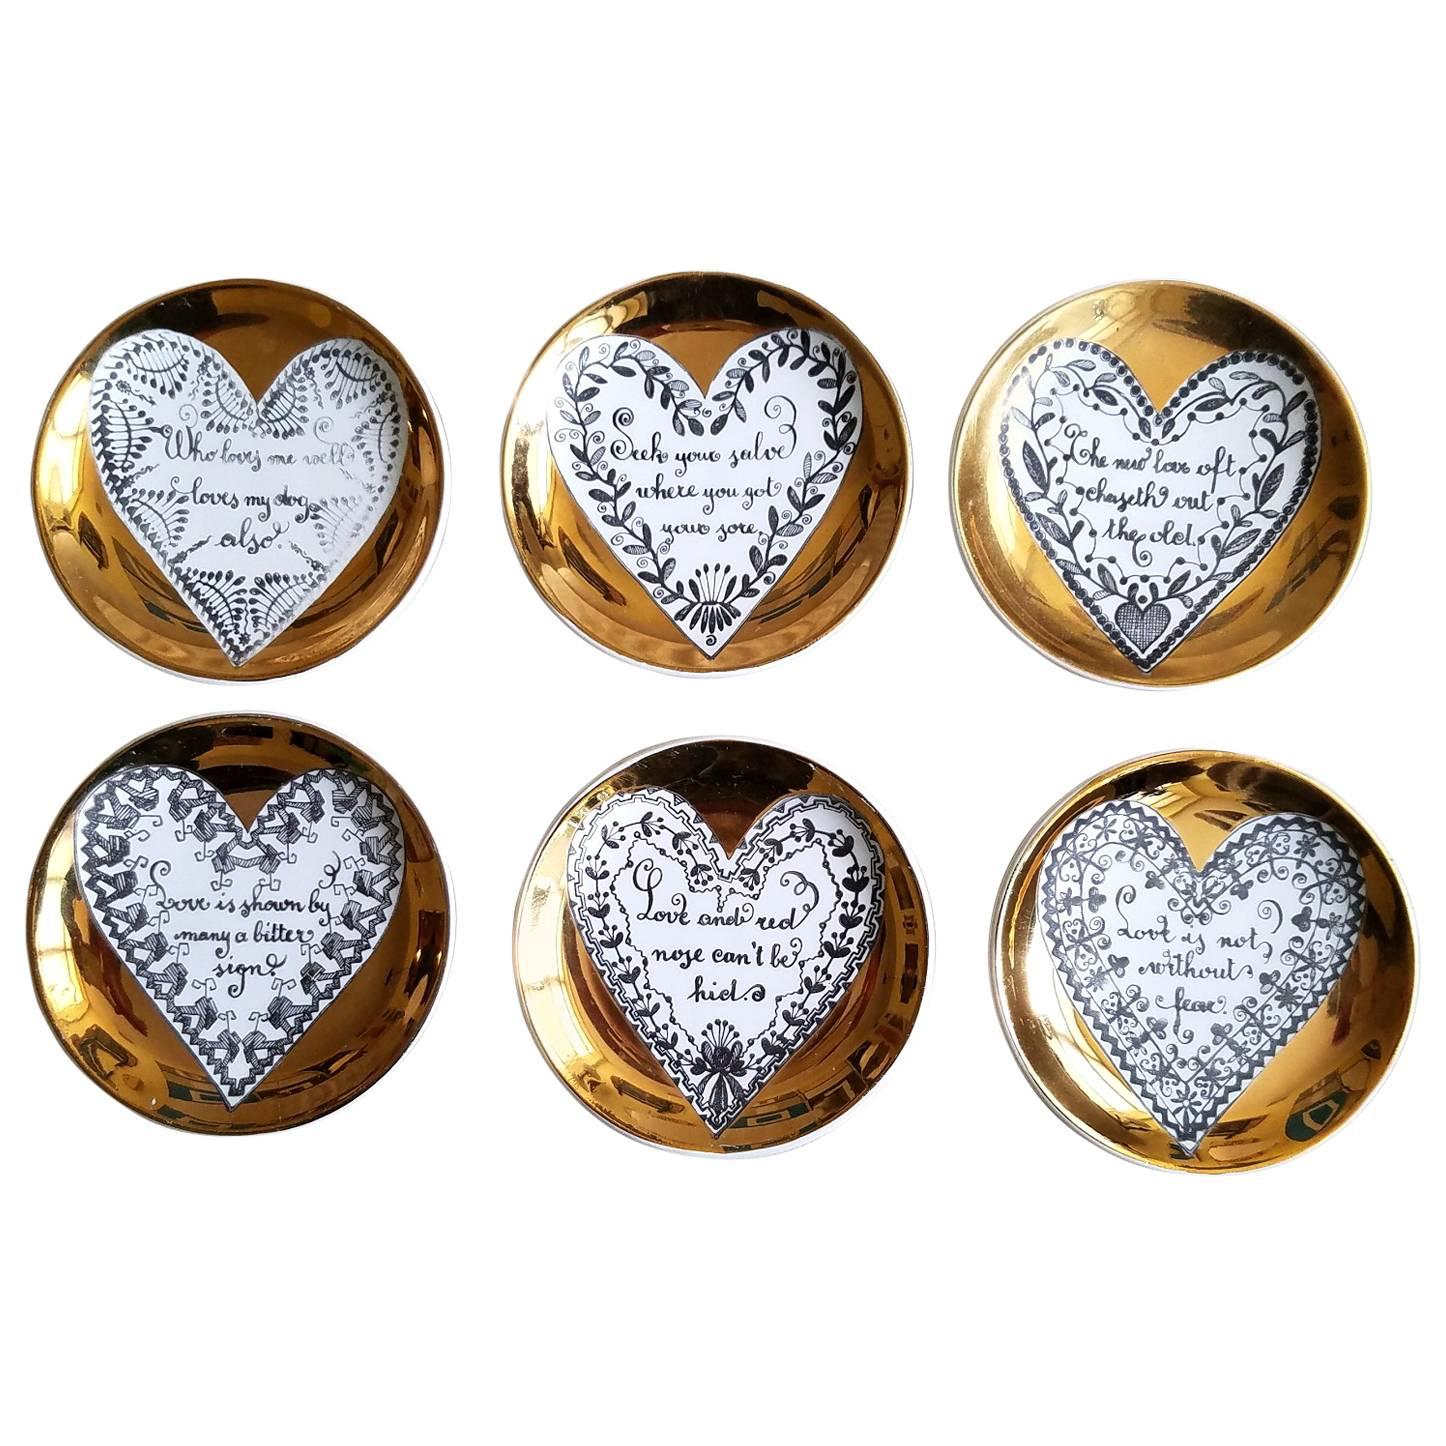 Piero Fornasetti Porcelain Coaster Set with Love, Hearts and Saying